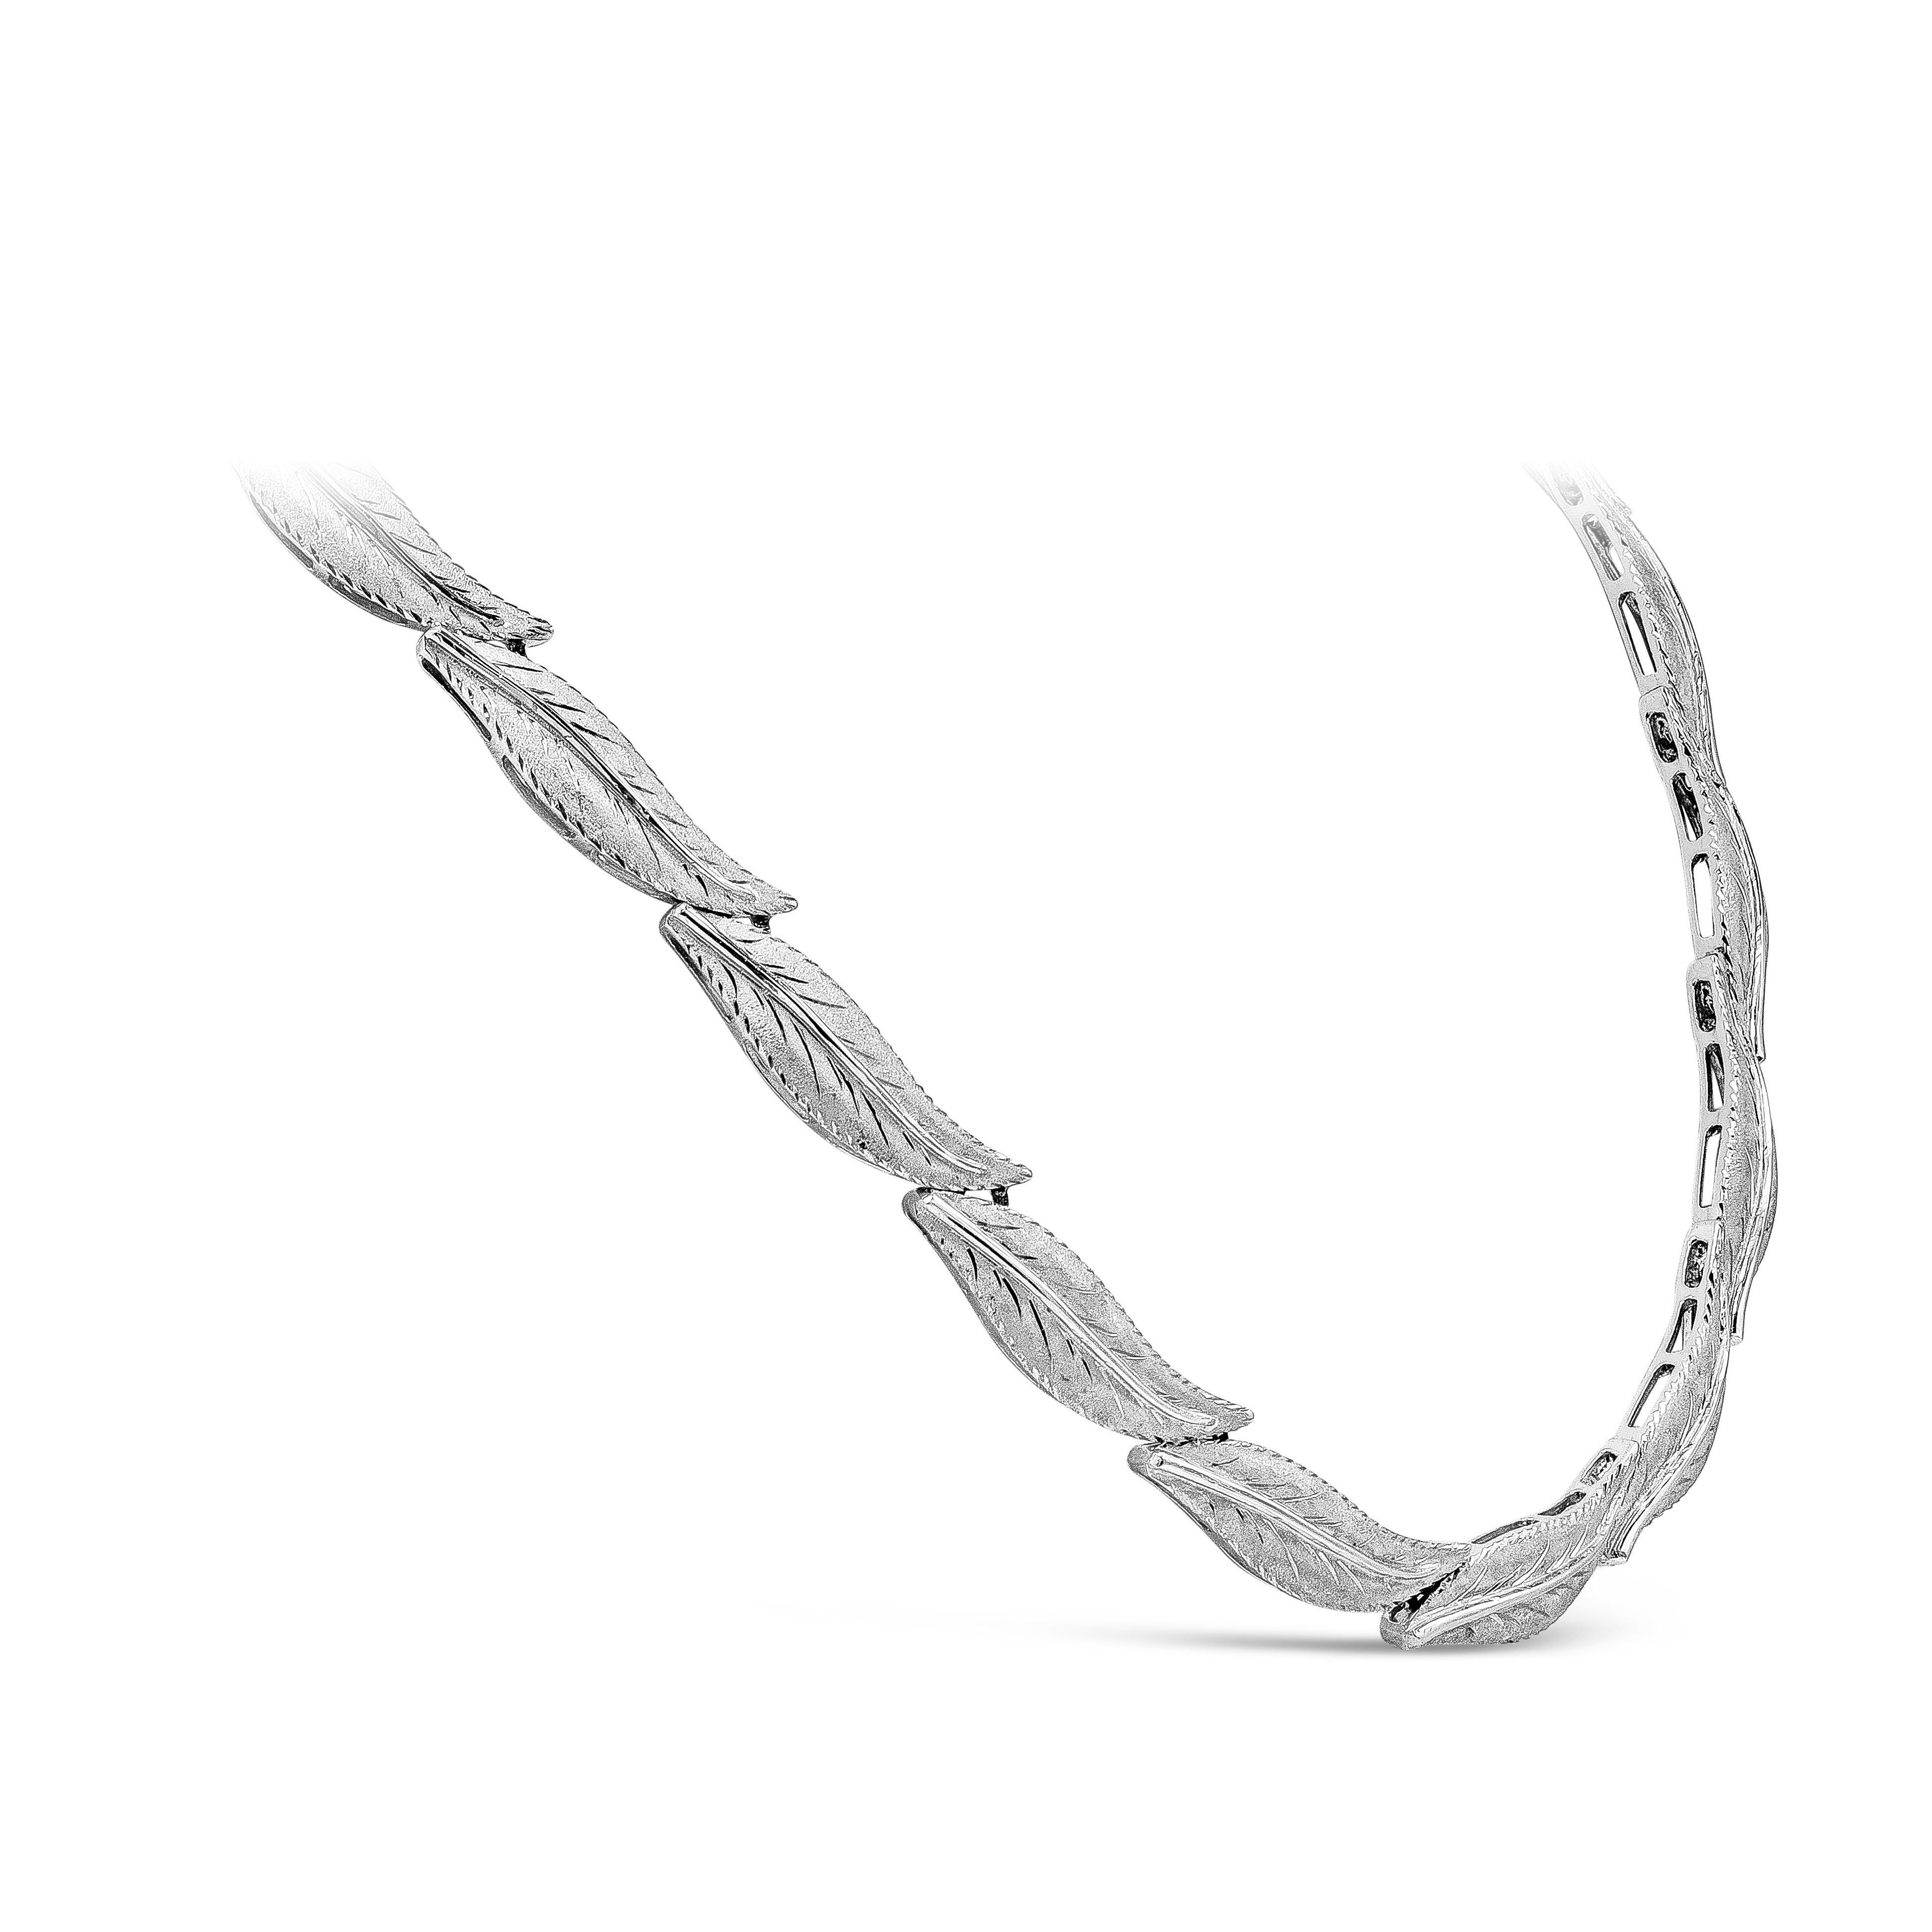 A beautiful and intricate piece of jewelry showcasing a row of interconnected leaves made in 18k white gold. Necklace weighs 51.14 grams. Has a matching white gold bracelet. 

